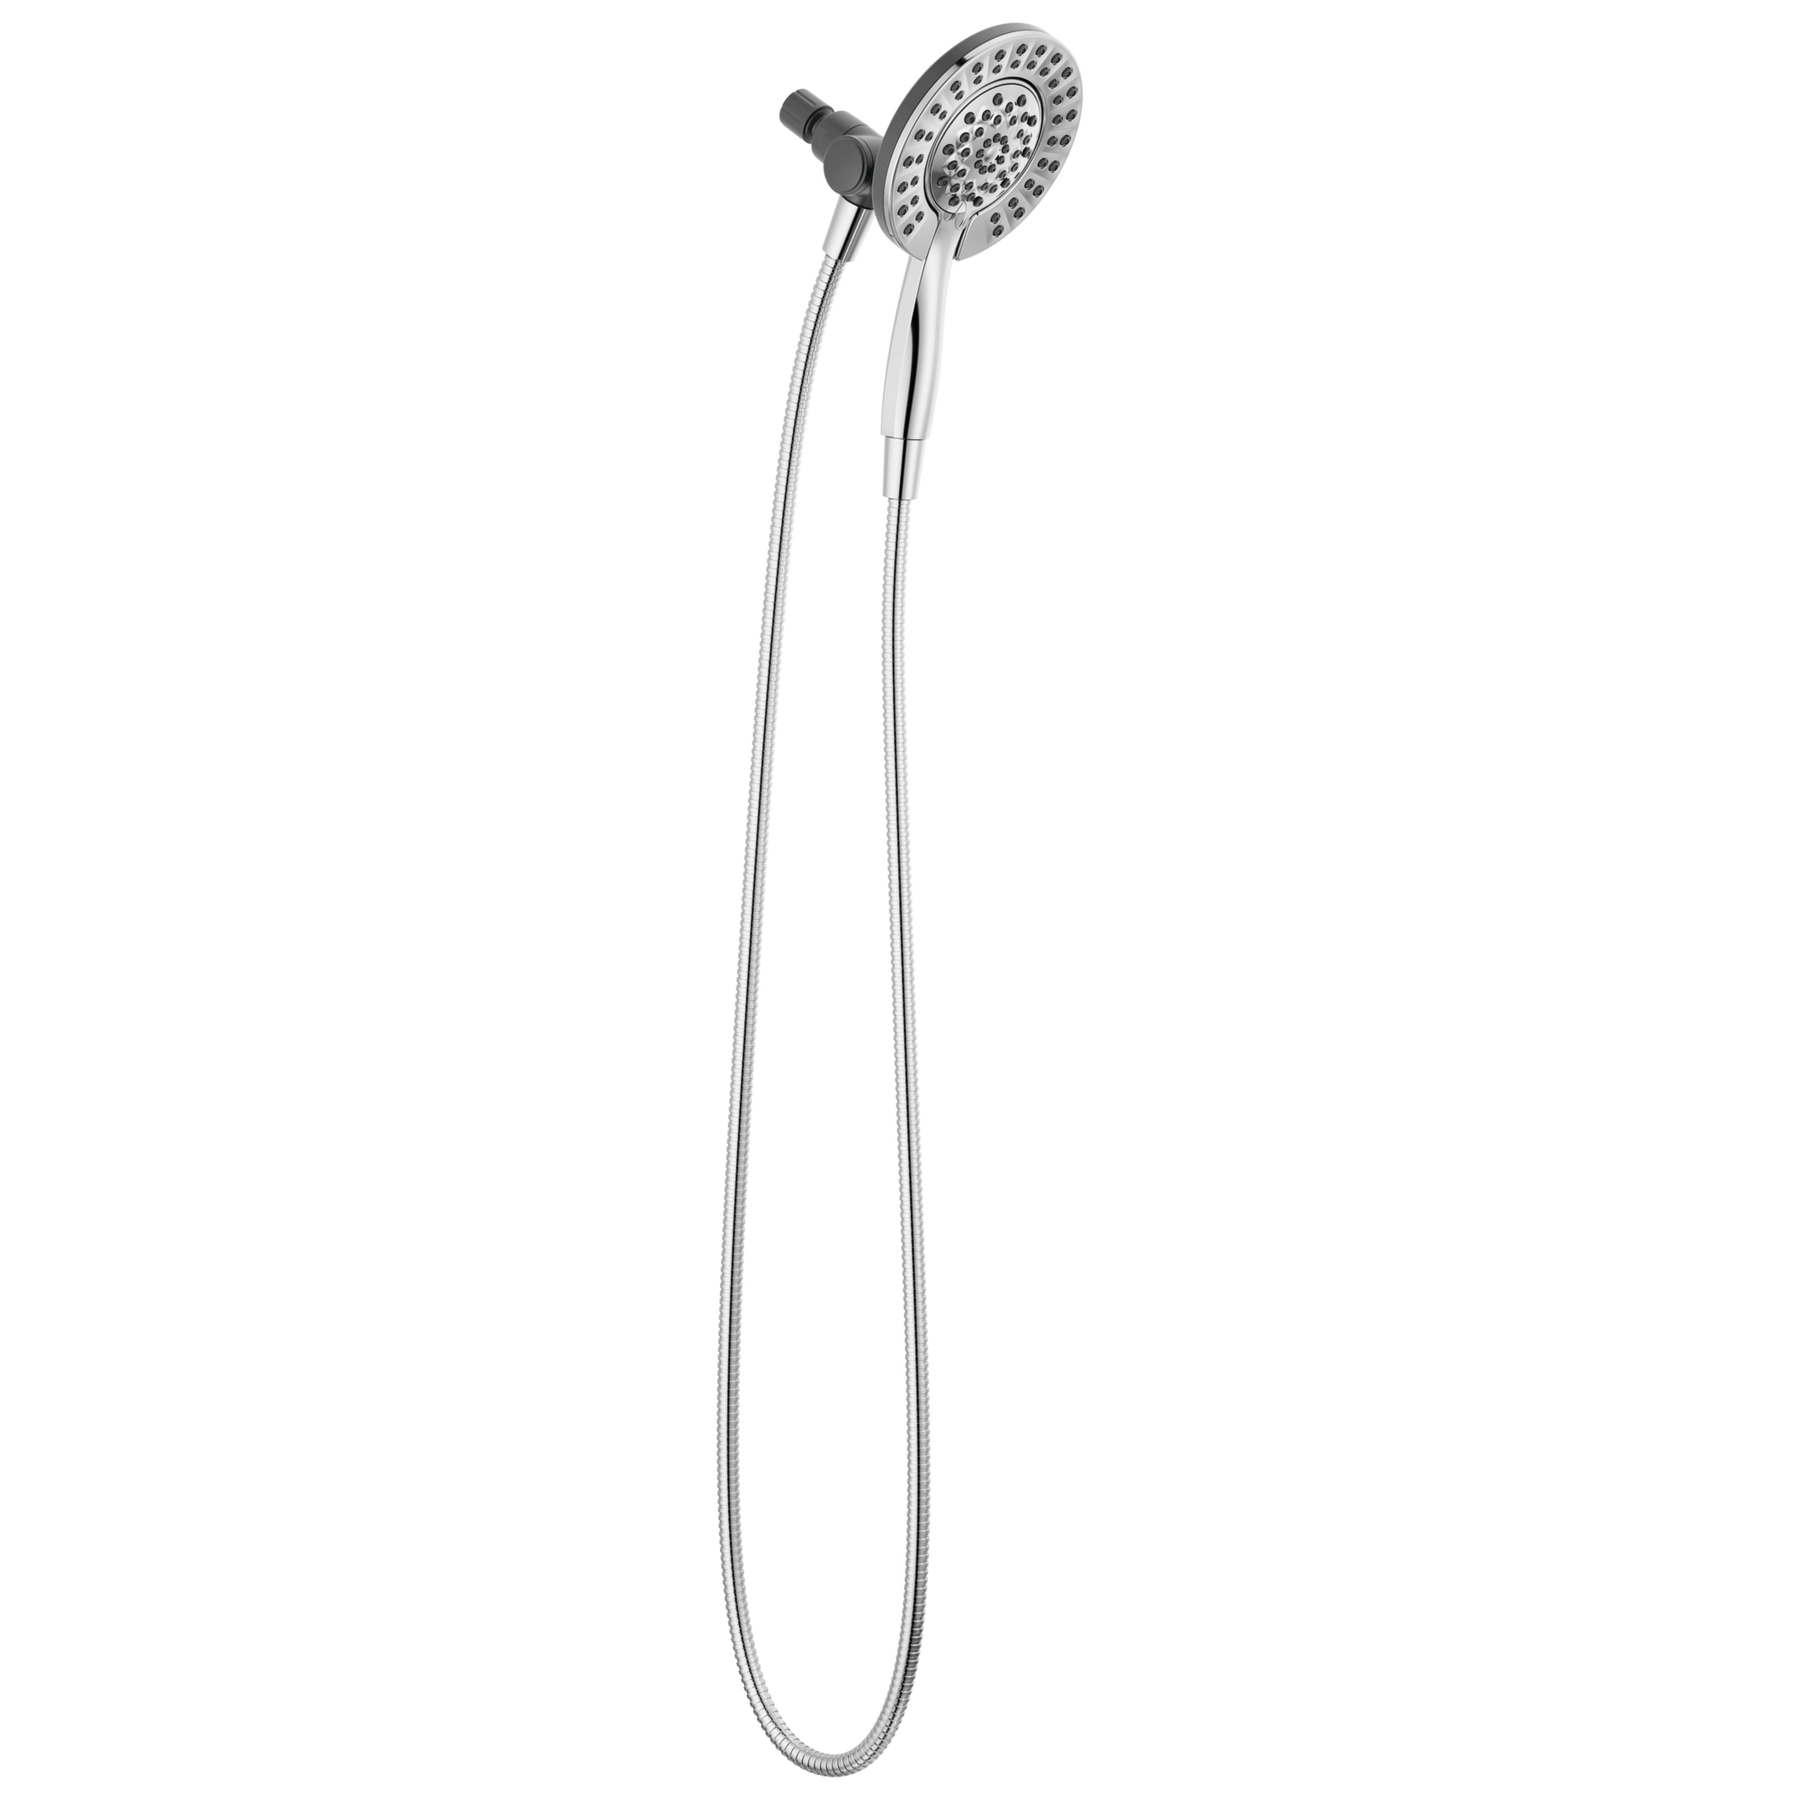 Shower Head & Hand Shower 1.75 GPM 4-Setting in Chrome 75285